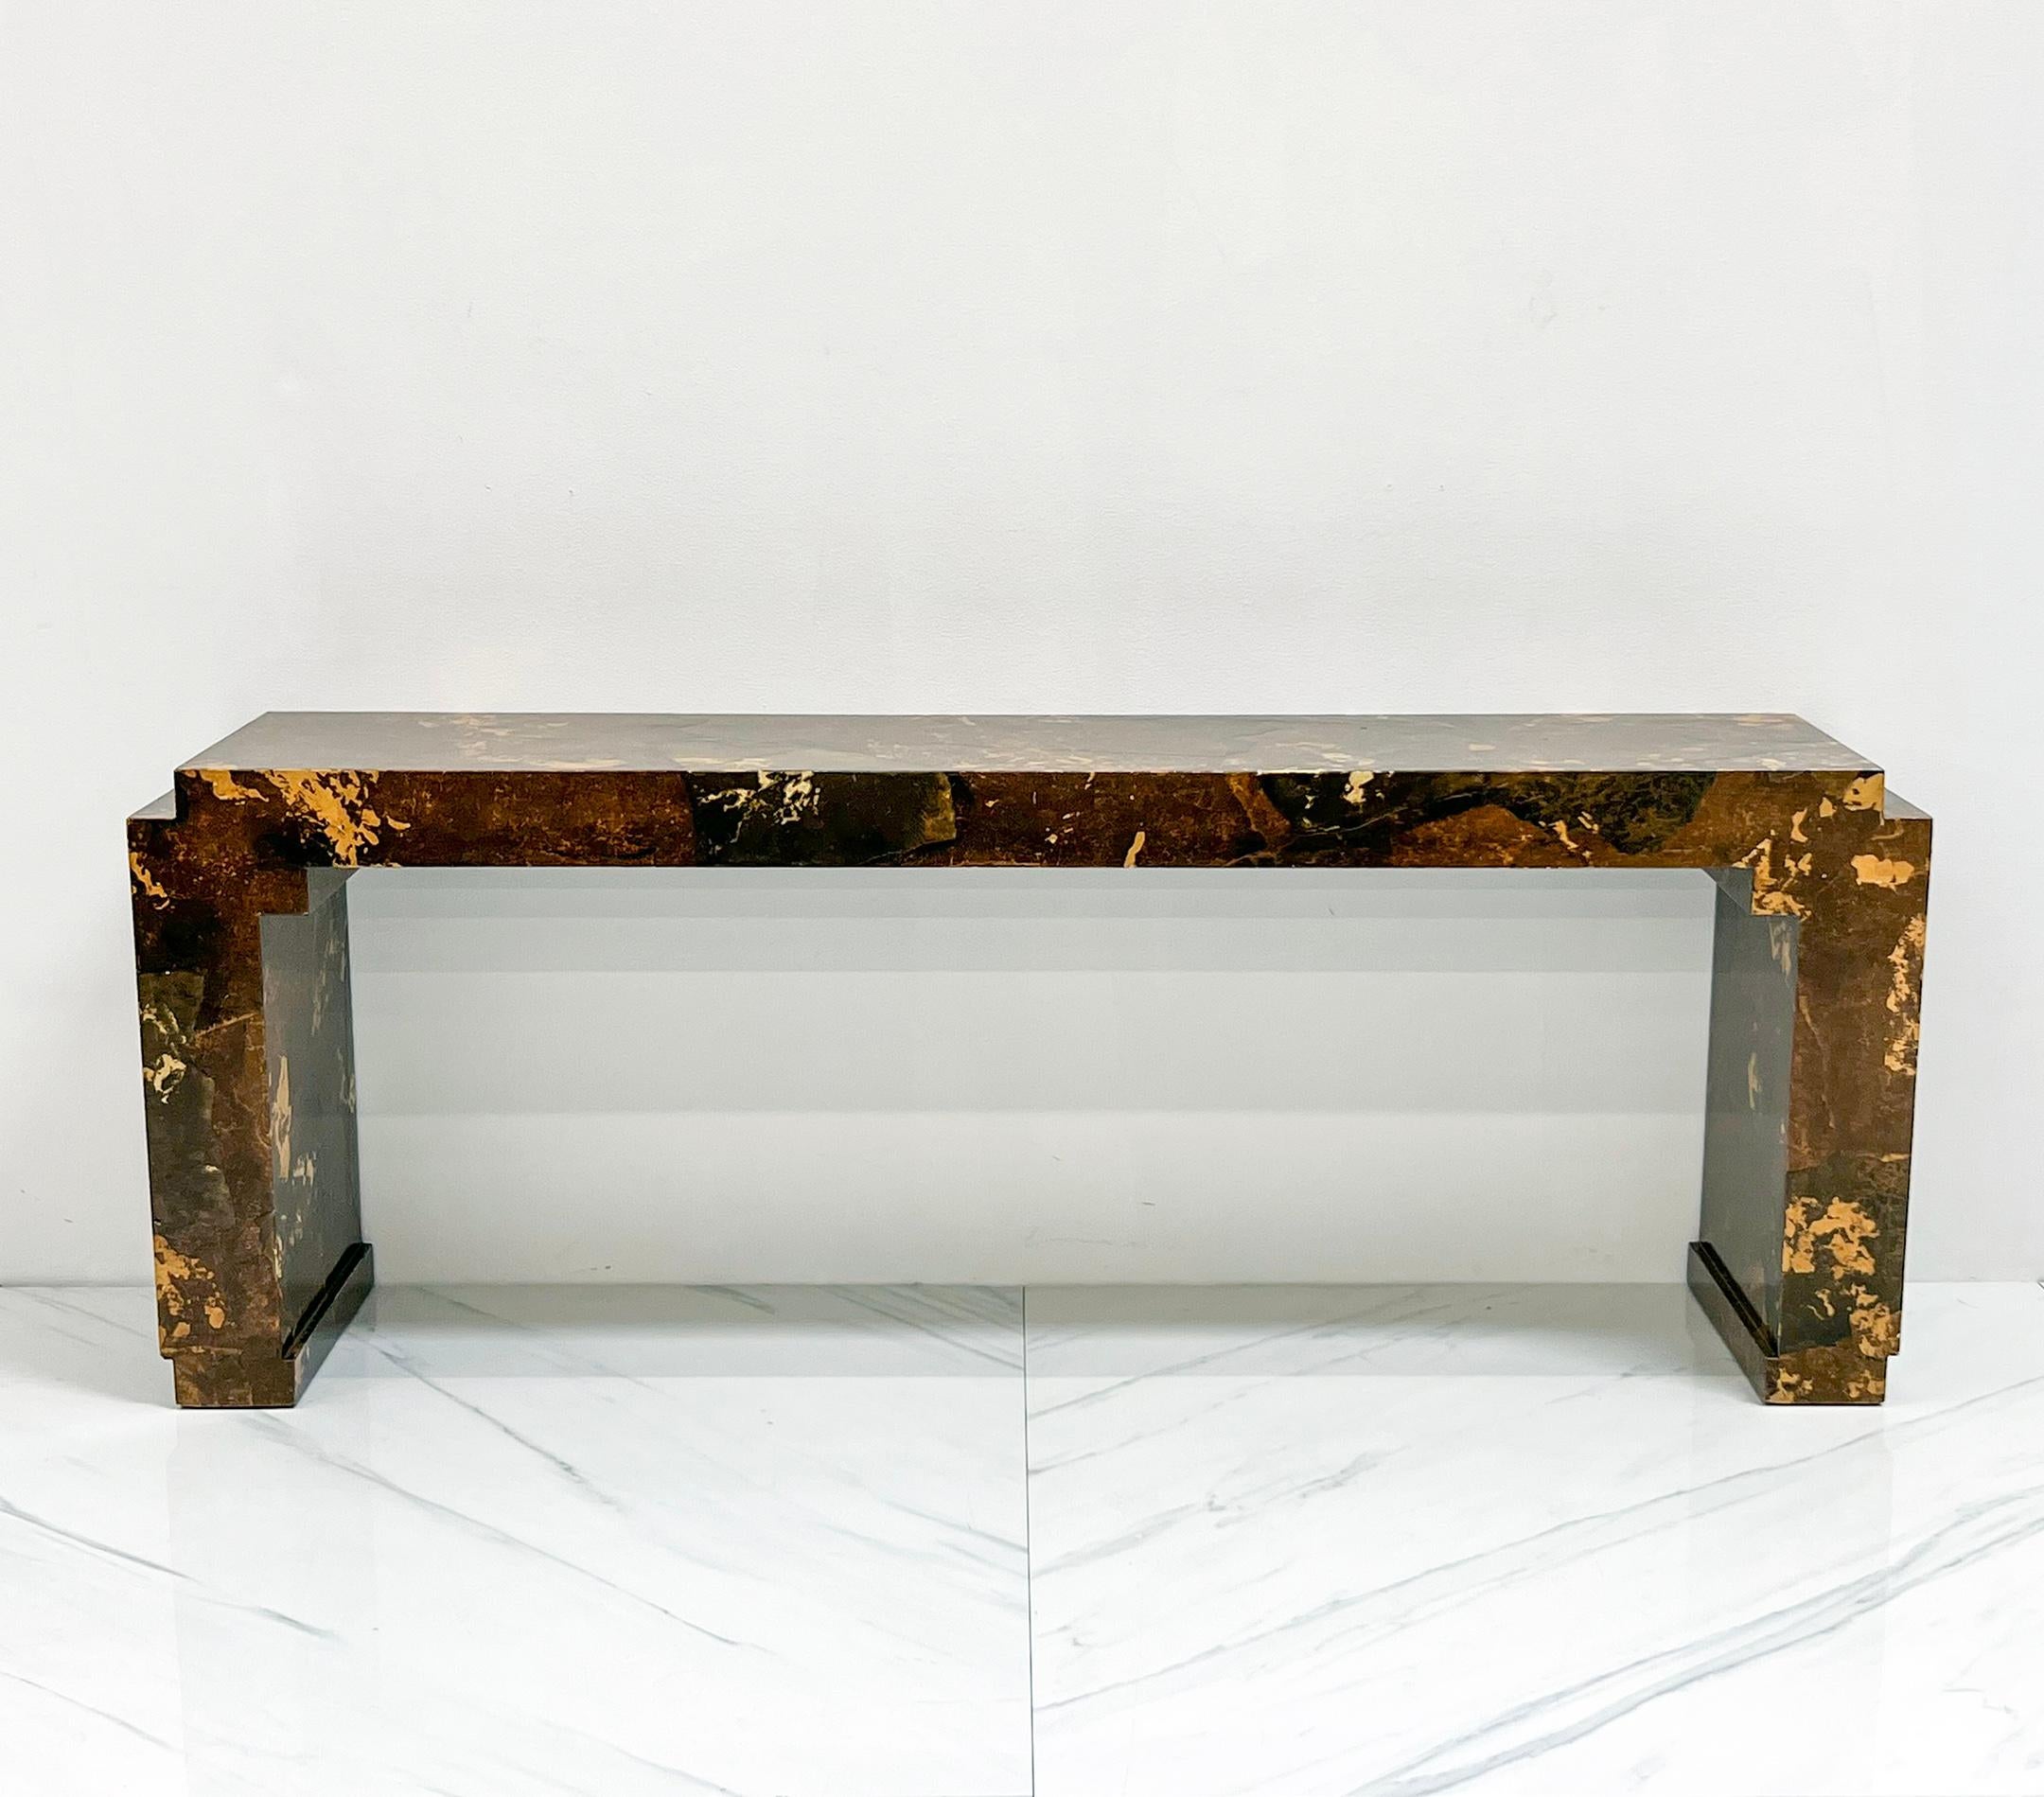 This table is absolutely gorgeous! Composed of solid wood clad with parchment paper and lacquered, this console table is timelessly chic with just a touch of chinoiserie.

The lacquered parchment is in browns, tans, and golden hues and almost has